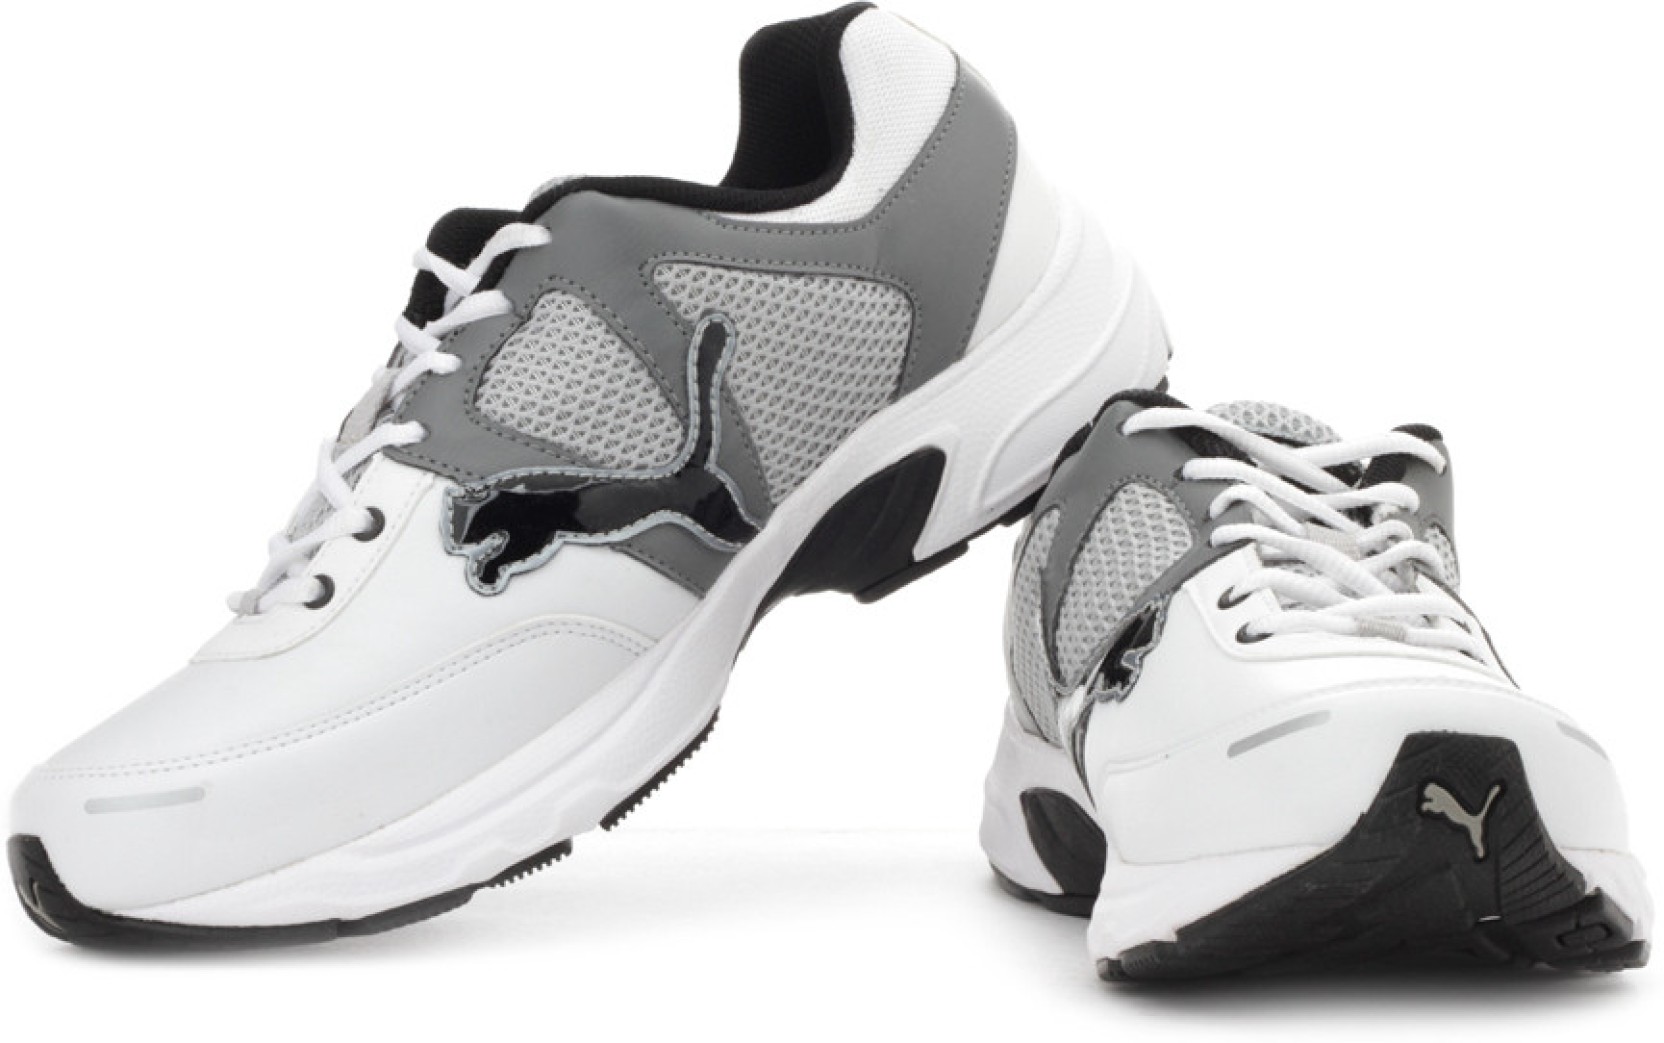 Puma Falcon Xt Ind. Running Shoes - Buy White, Black, Steeple Gray ...